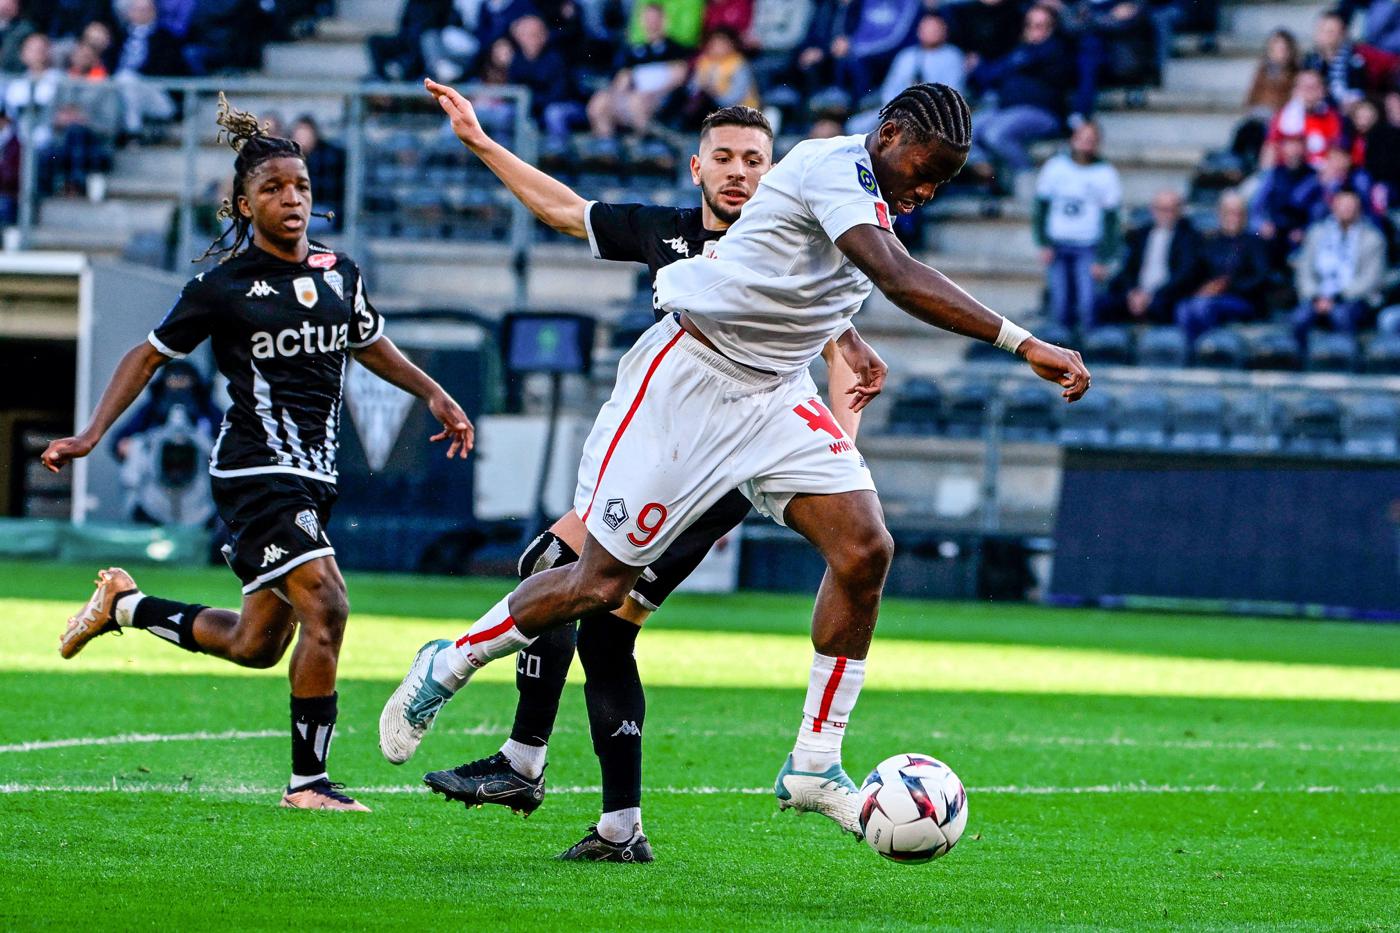 Angers - Lille - 1:0. French Championship, round 30. Match review, statistics.